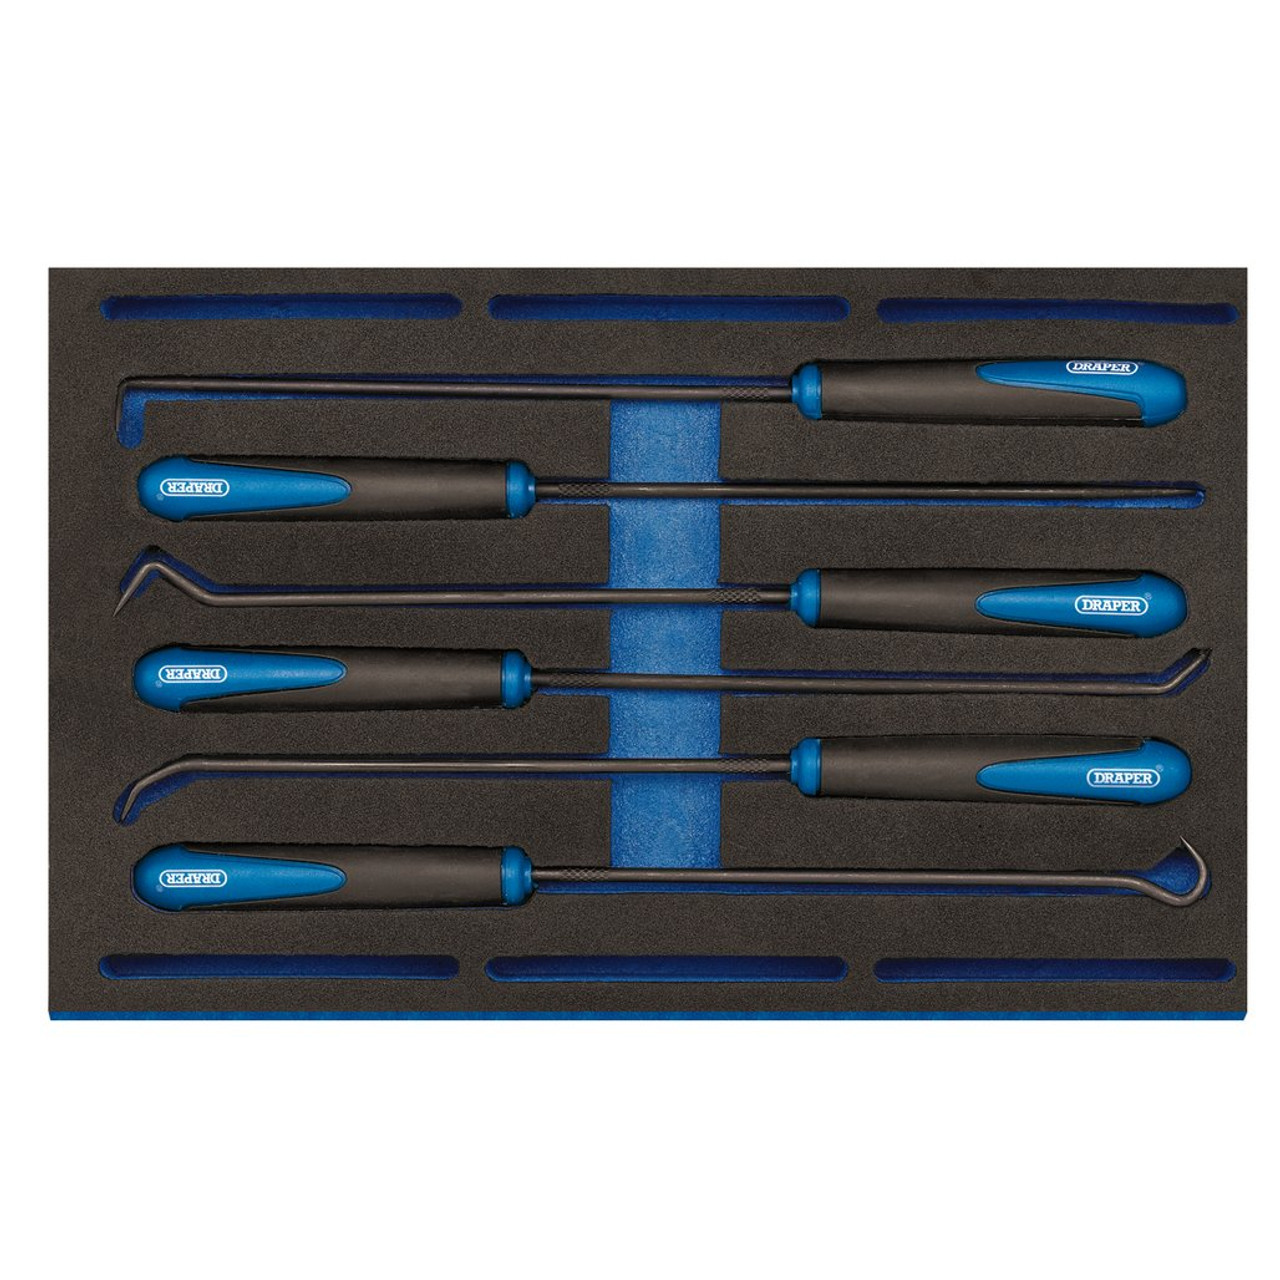 Long Reach Hook and Pick Set in 1/4 Drawer EVA Insert Tray (6 Piece)  (63494)